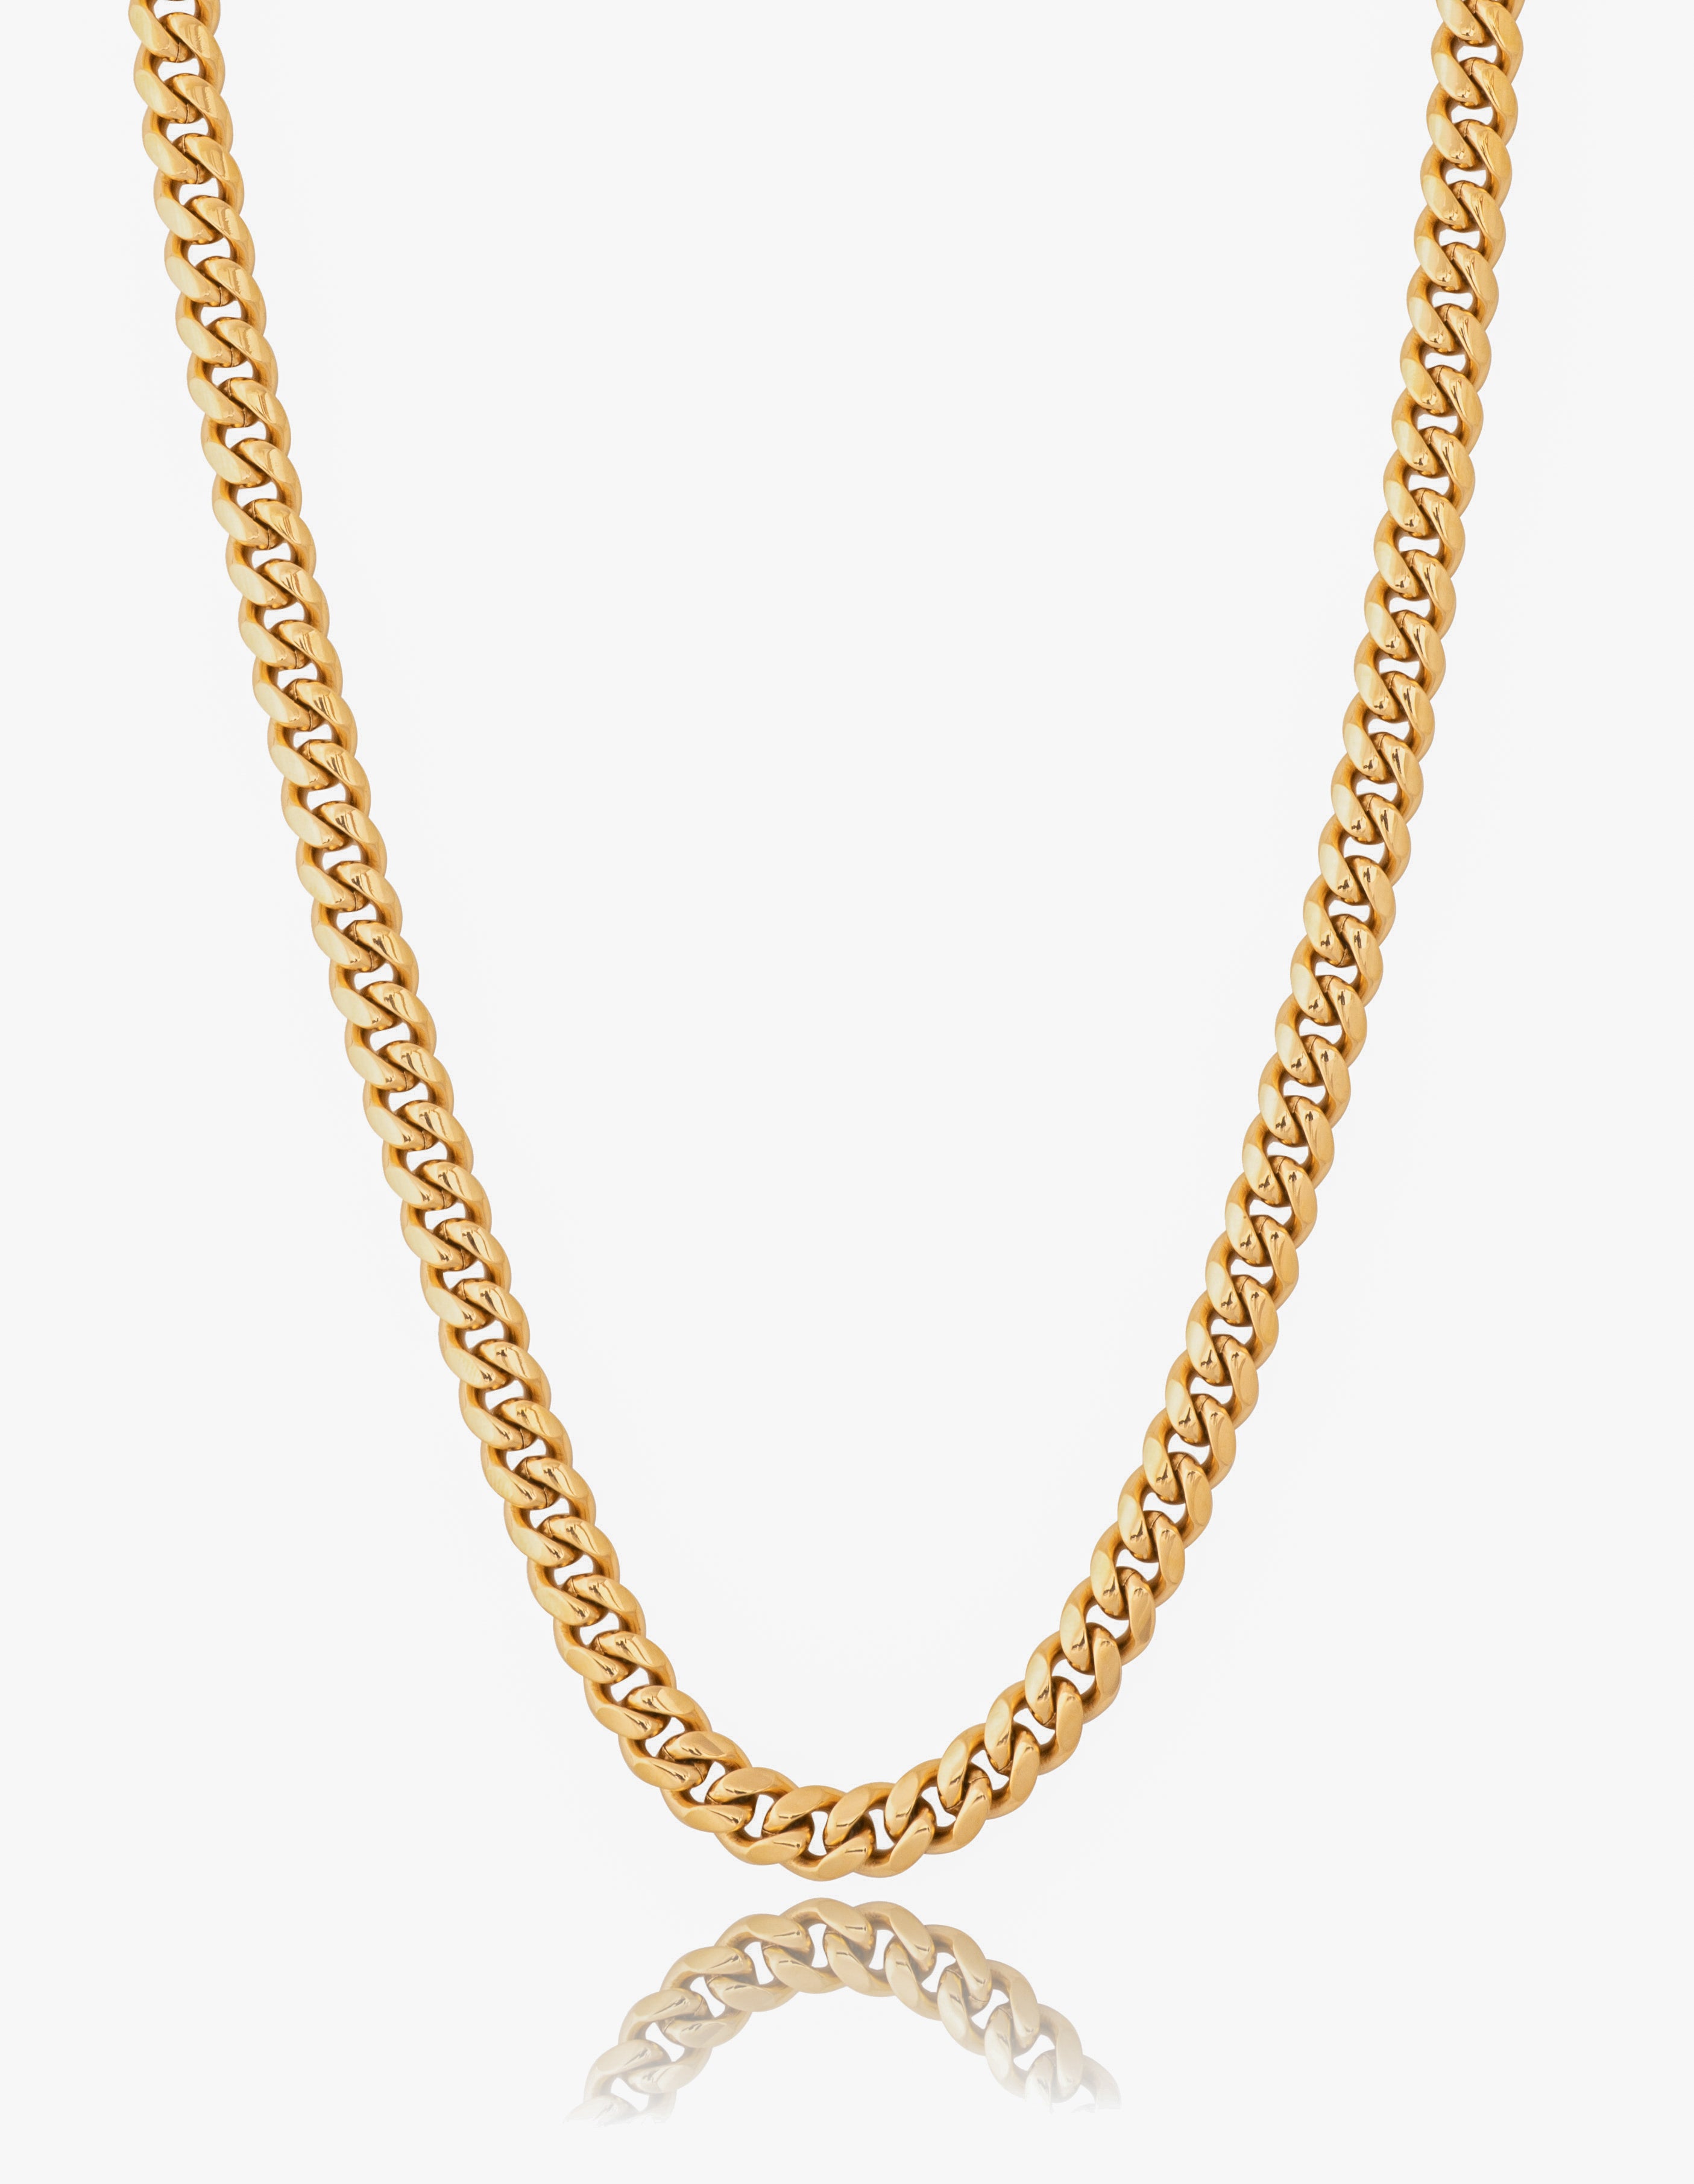 18K Gold Plated Cuban Link Chain.